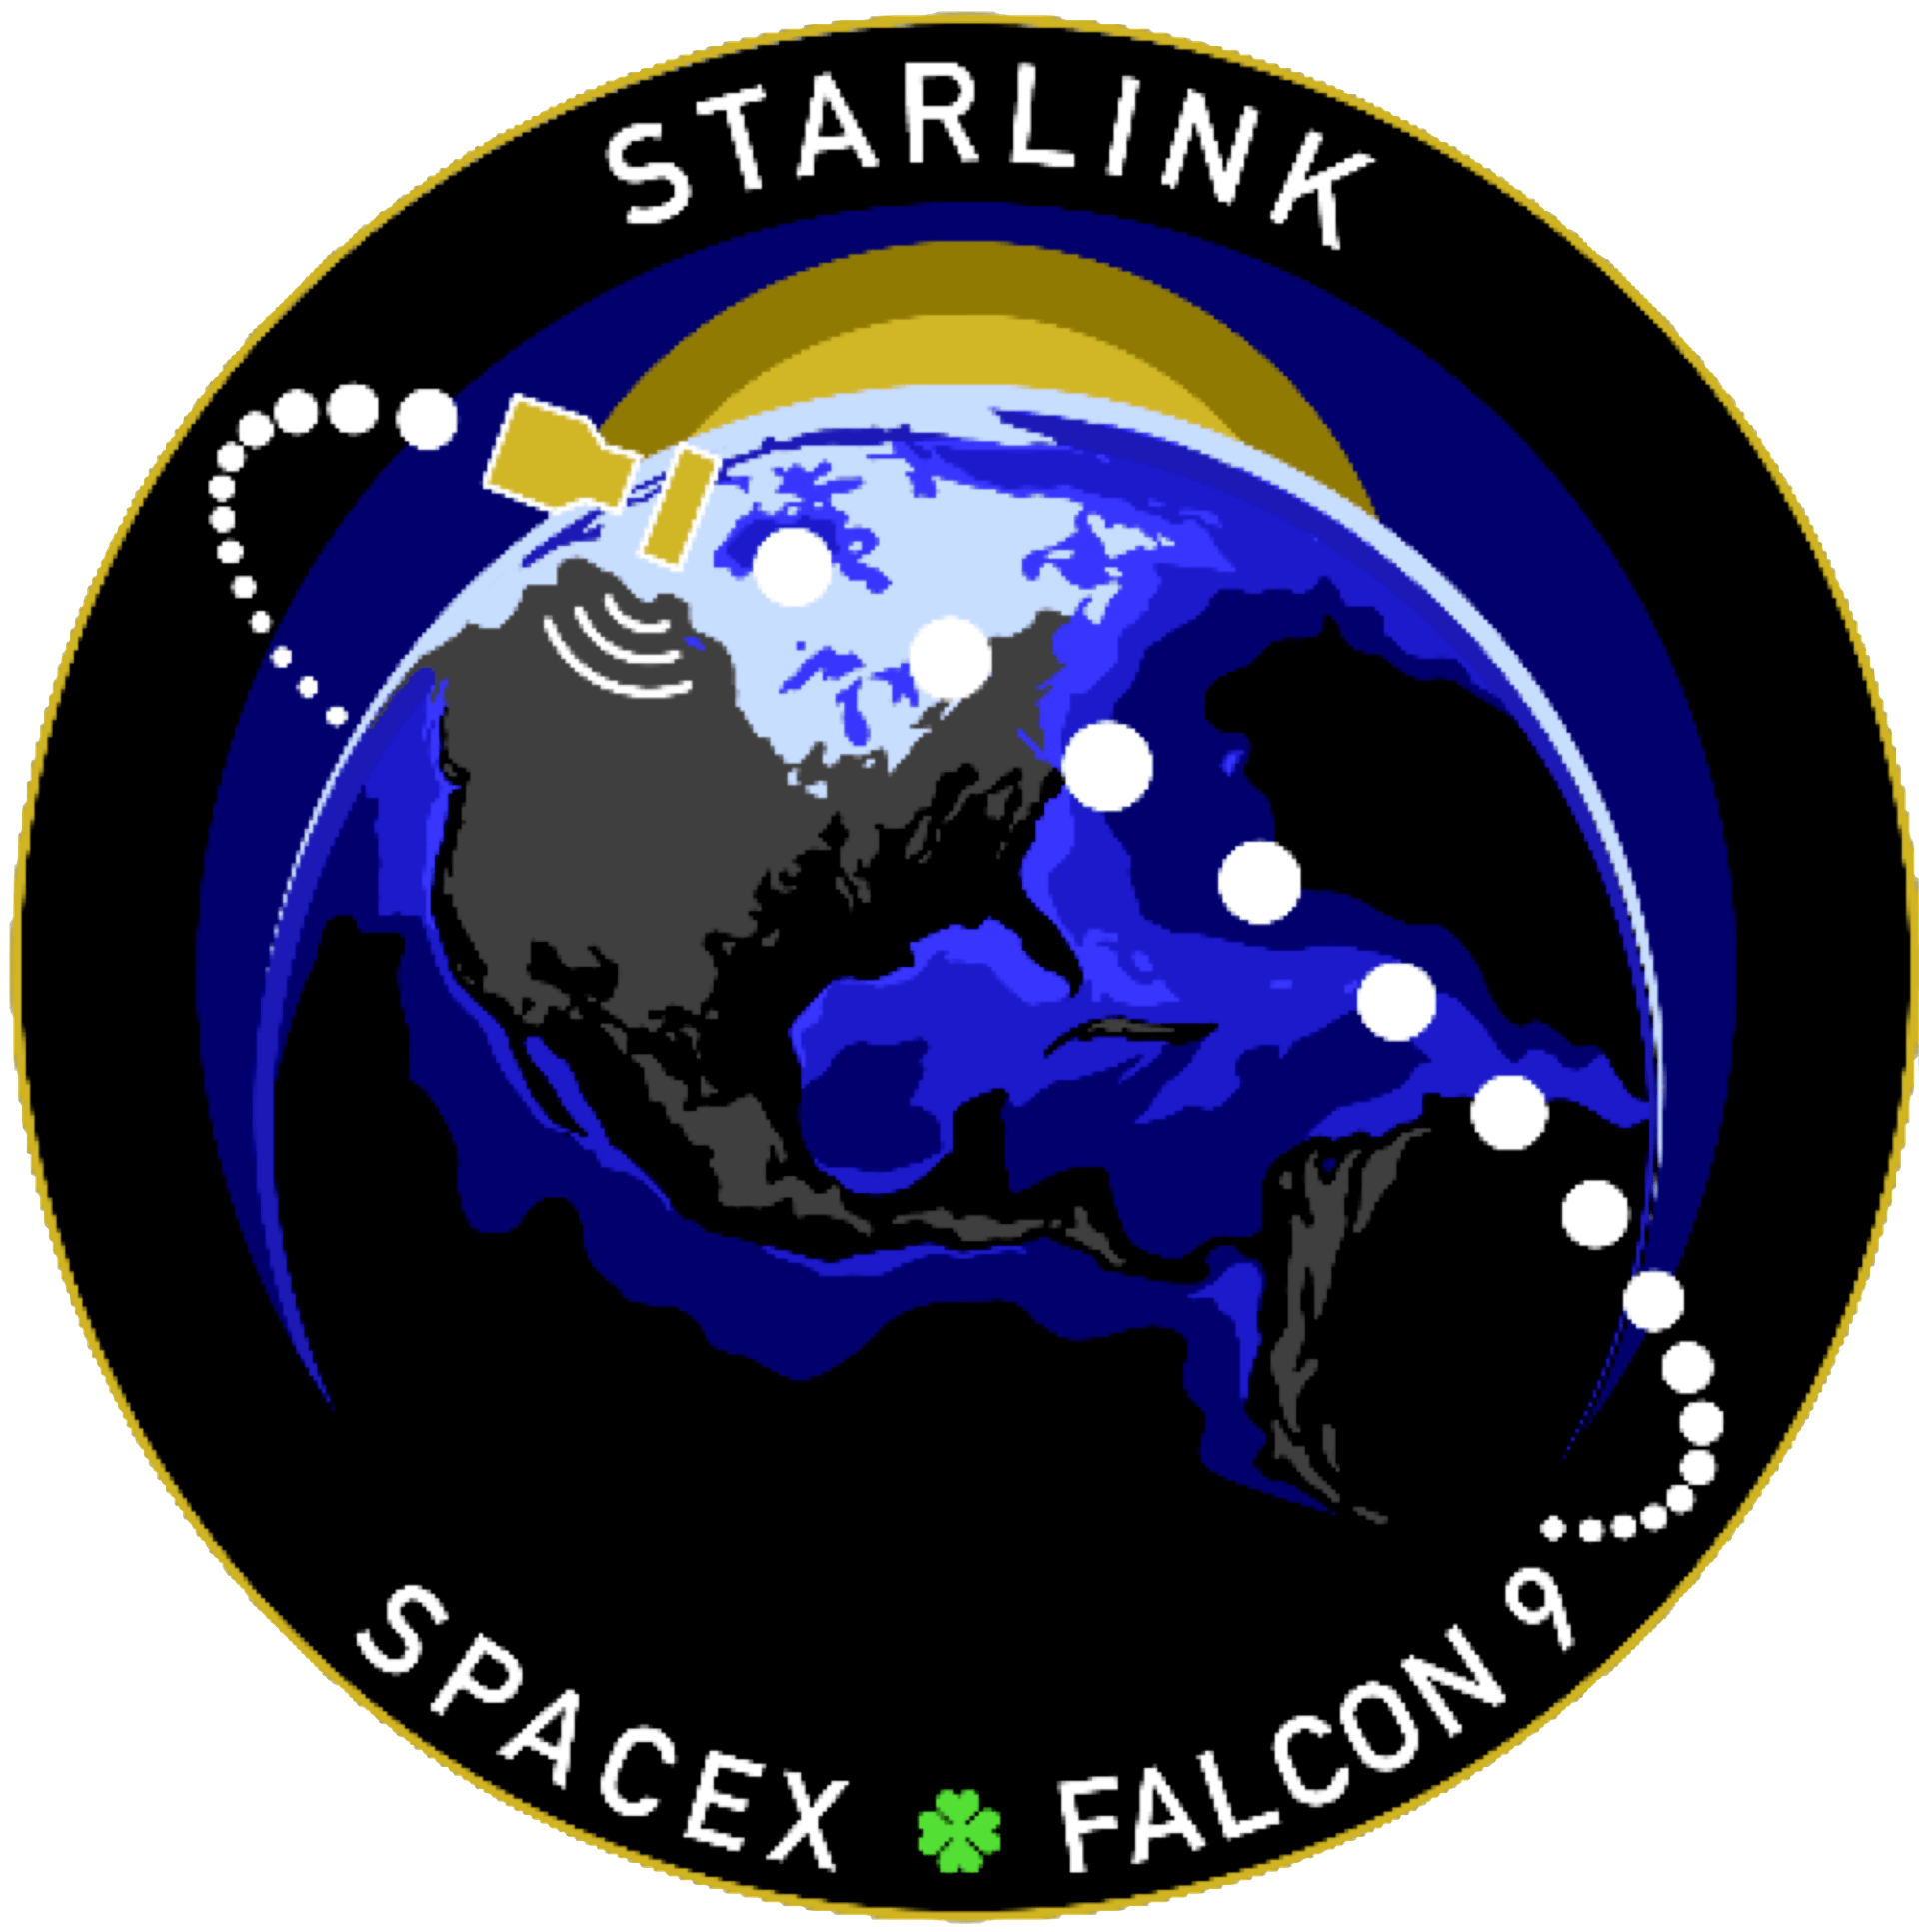 Mission patch for Starlink 14